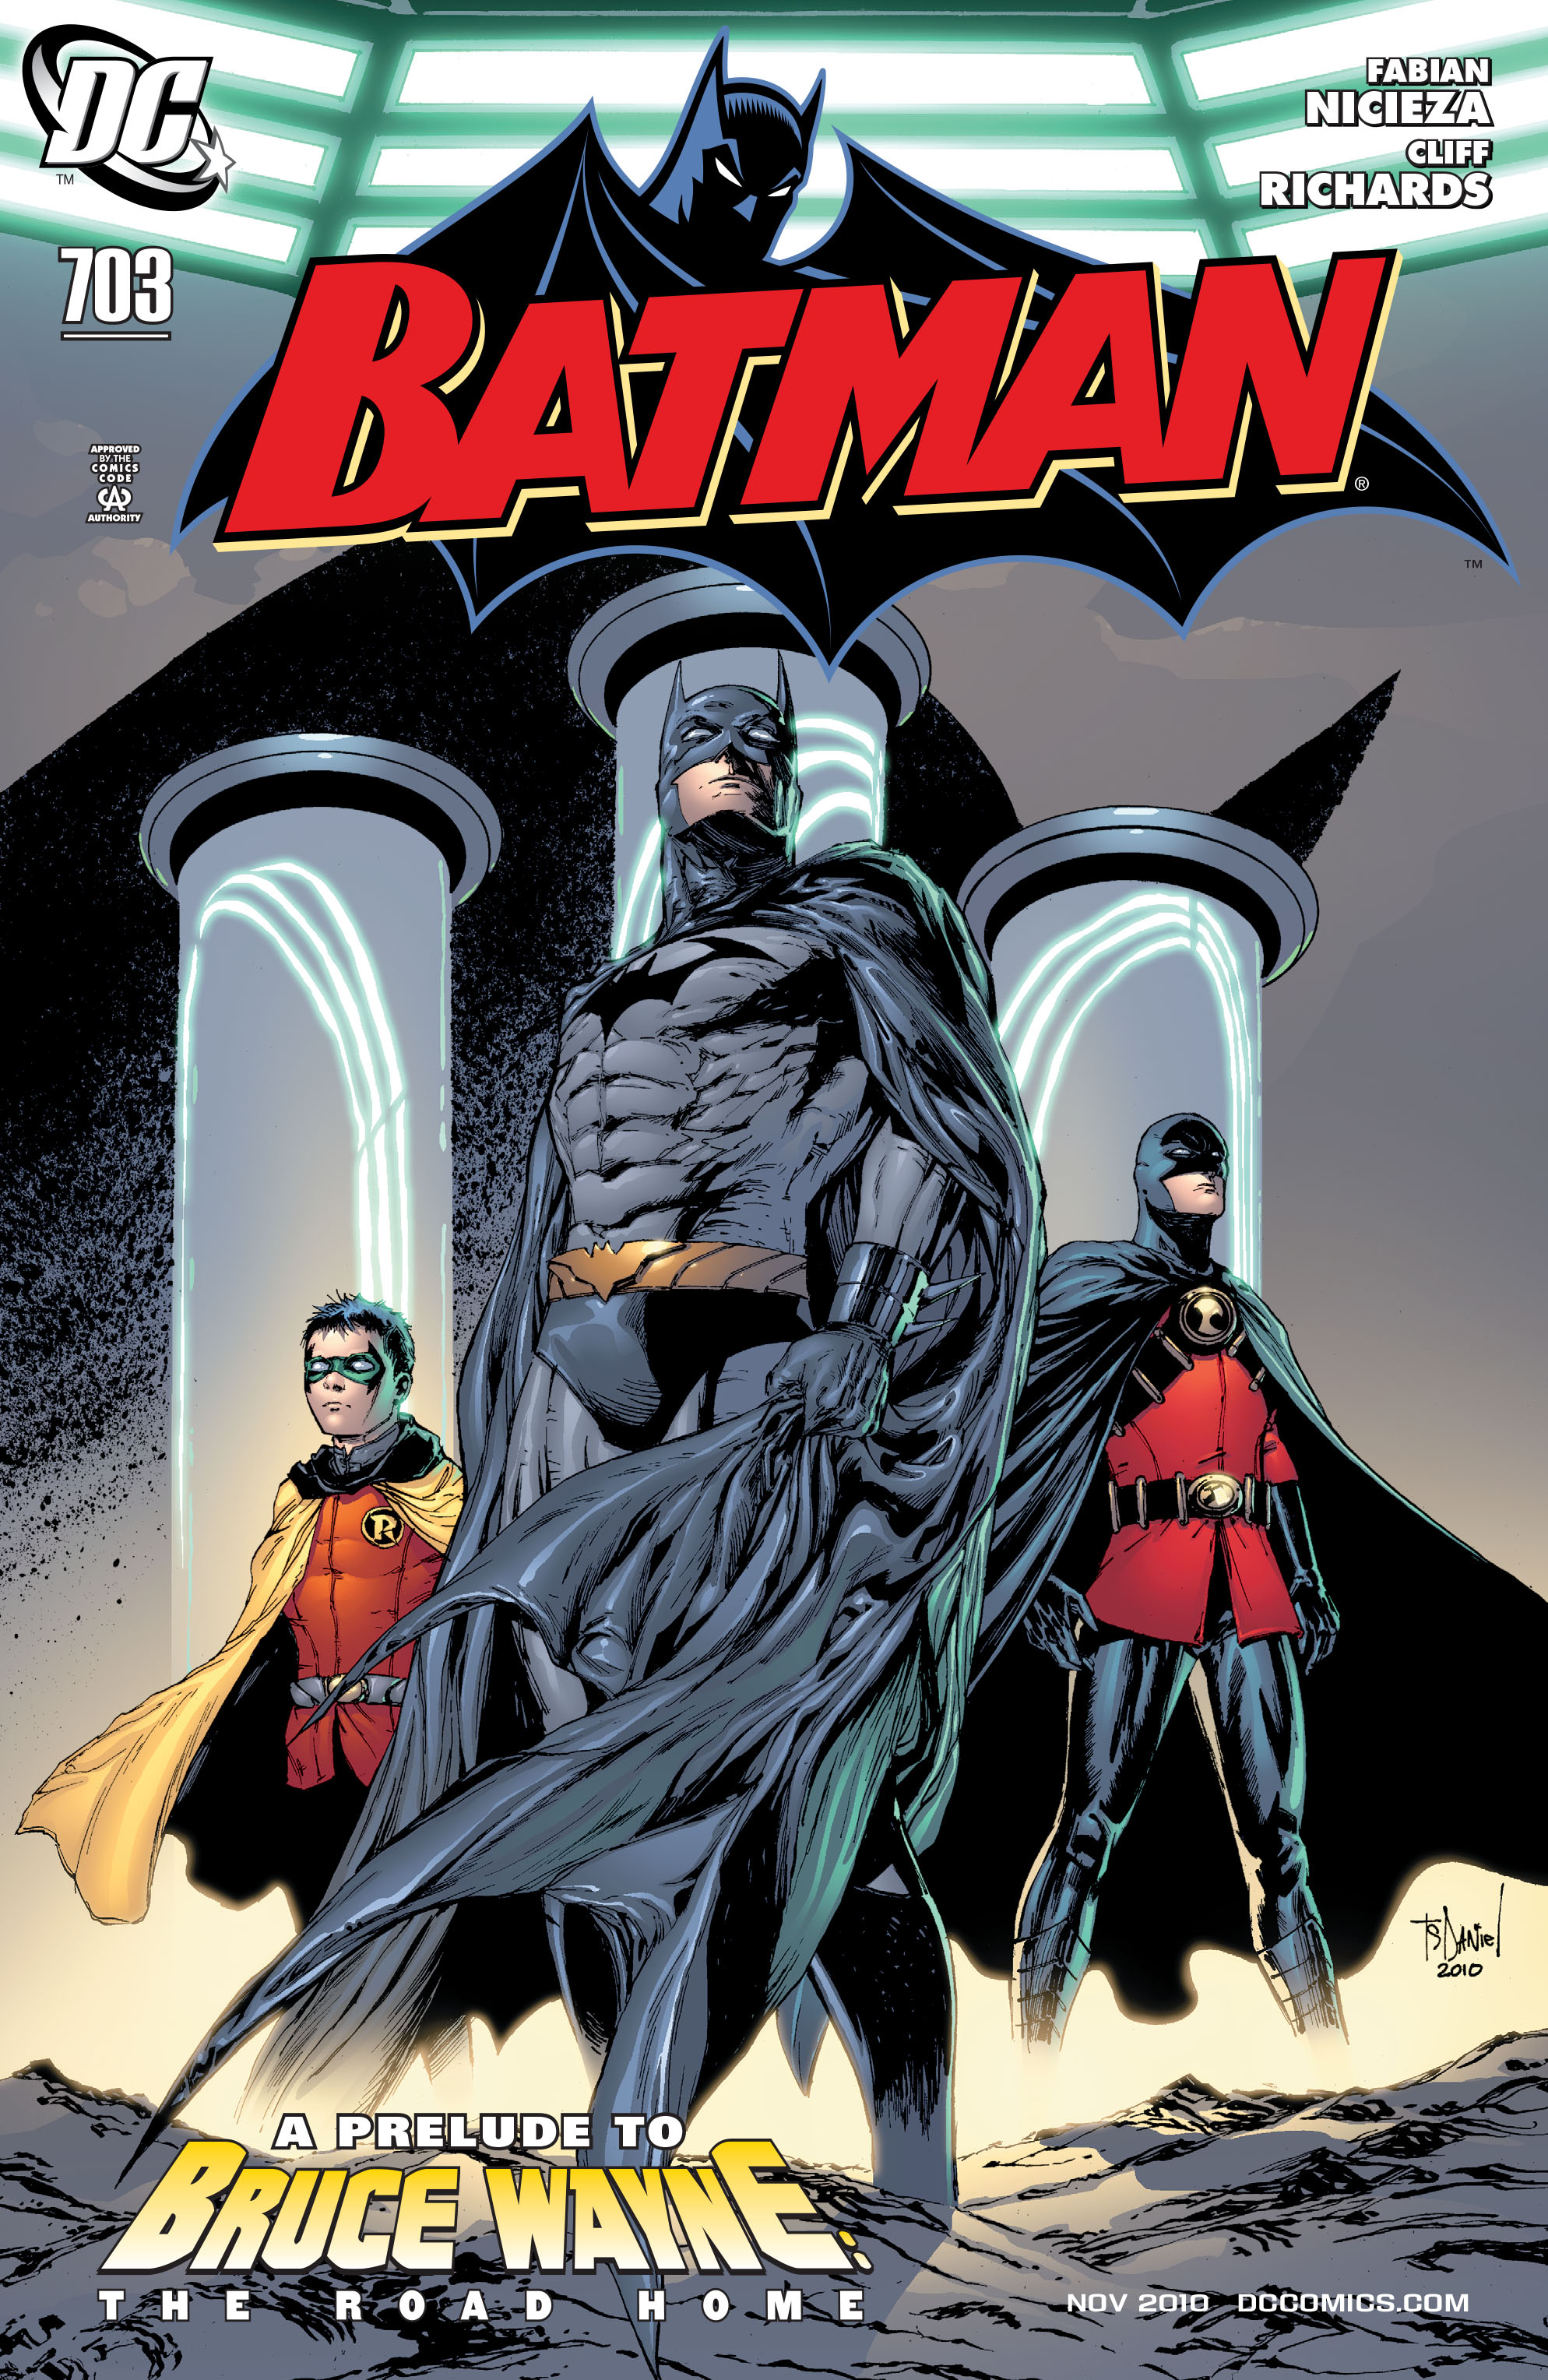 Batman 1940 Issue 703 | Read Batman 1940 Issue 703 comic online in high  quality. Read Full Comic online for free - Read comics online in high  quality .| READ COMIC ONLINE